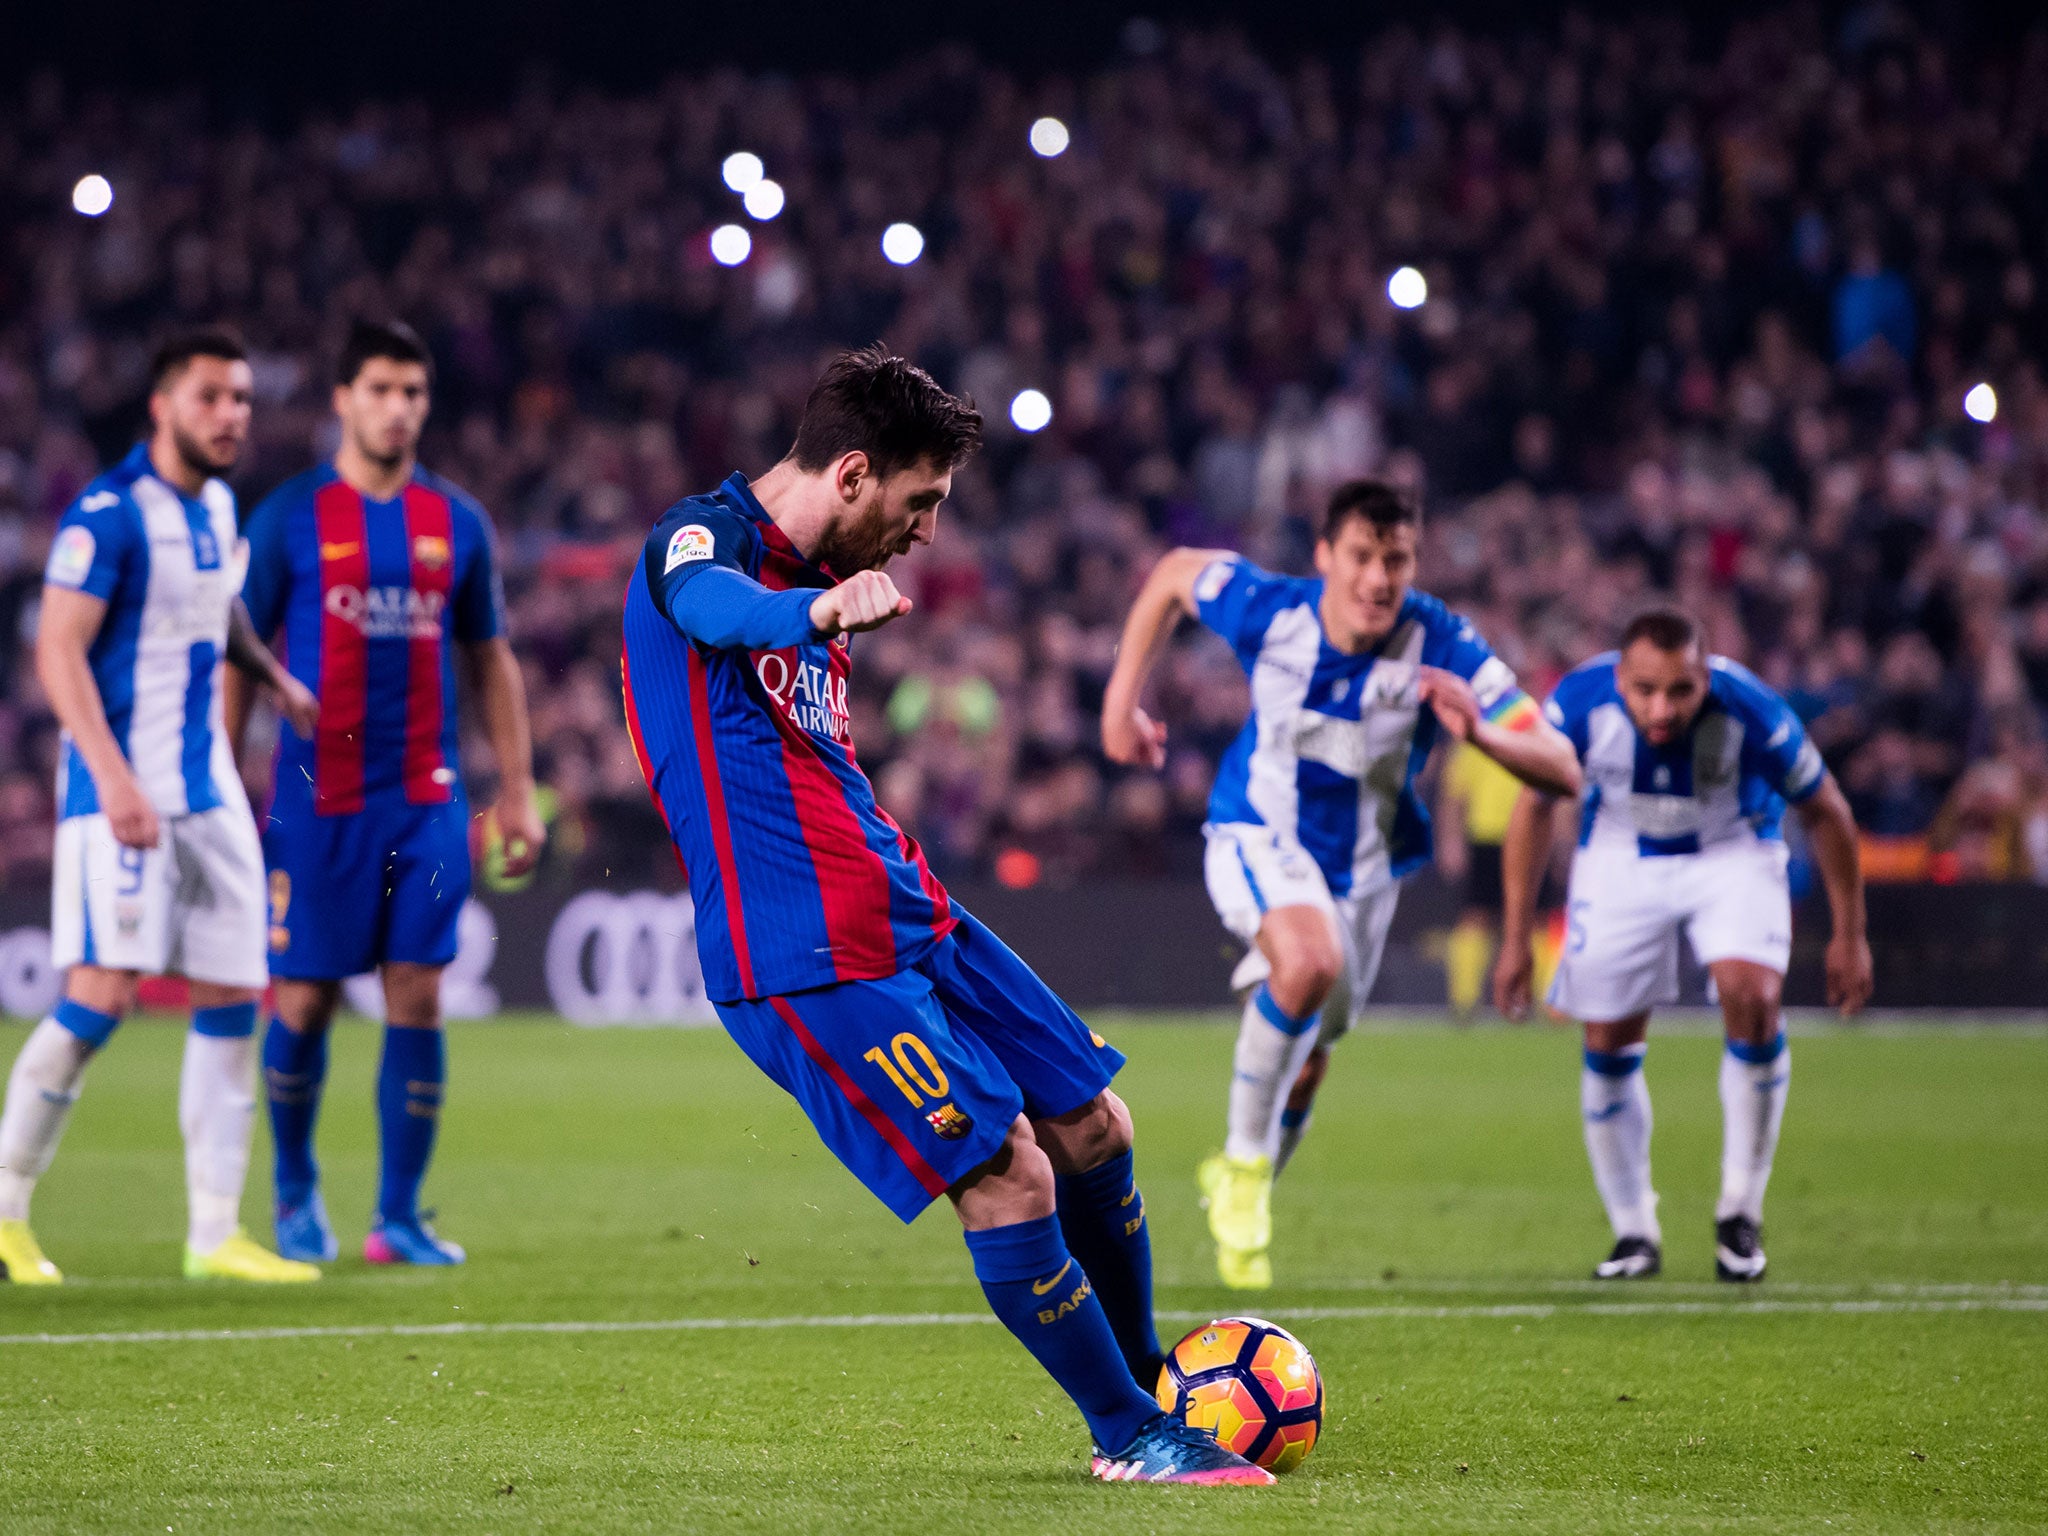 Lionel Messi's late penalty secured all three points for Barcelona against Leganes